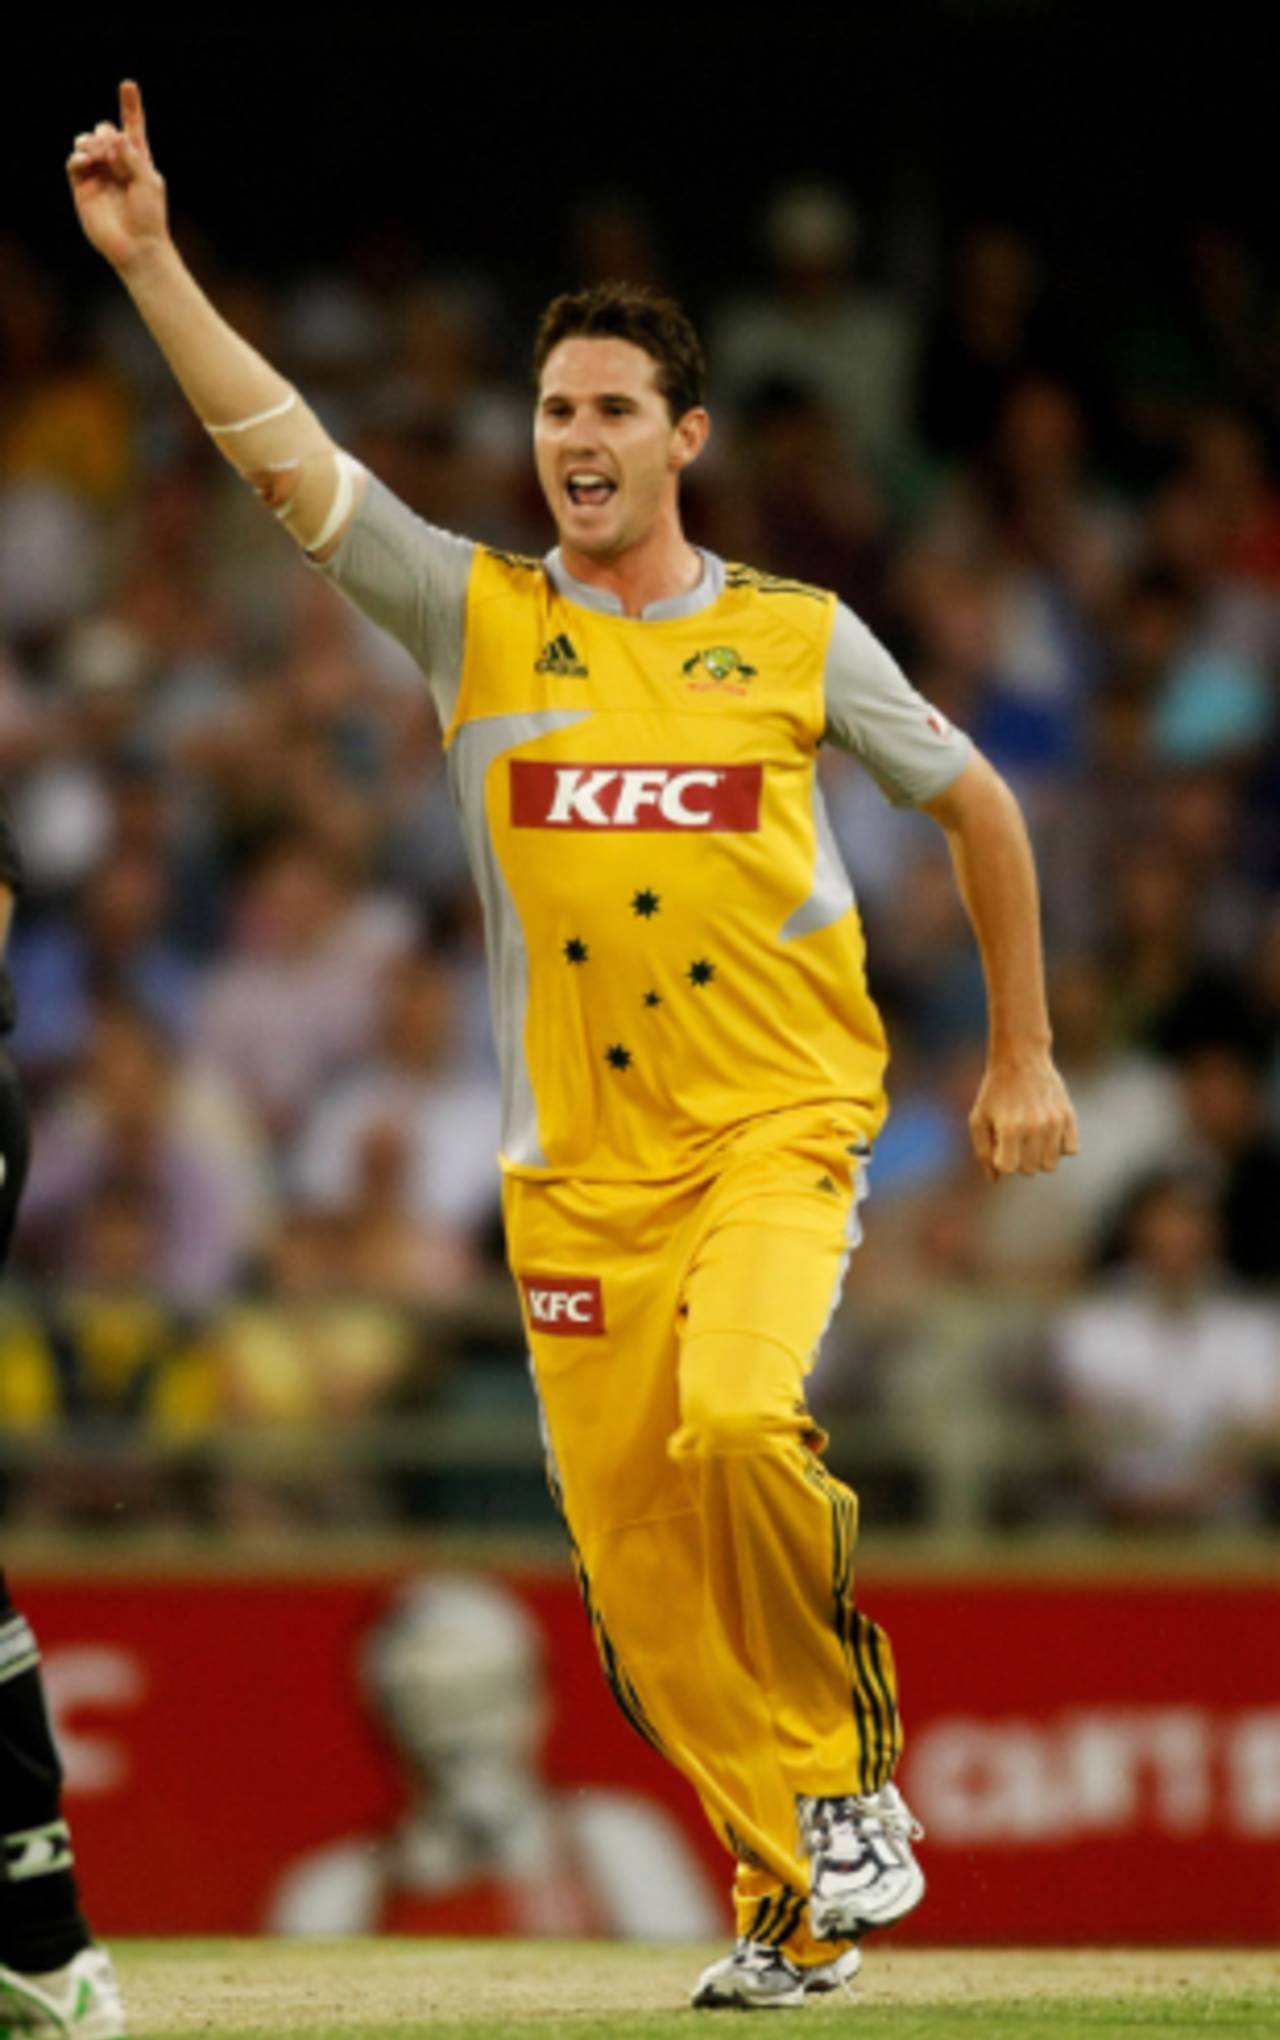 Shaun Tait is thrilled after claiming his first wicket in Twenty20s, Australia v New Zealand, Twenty20 International, Perth, December 11, 2007 
